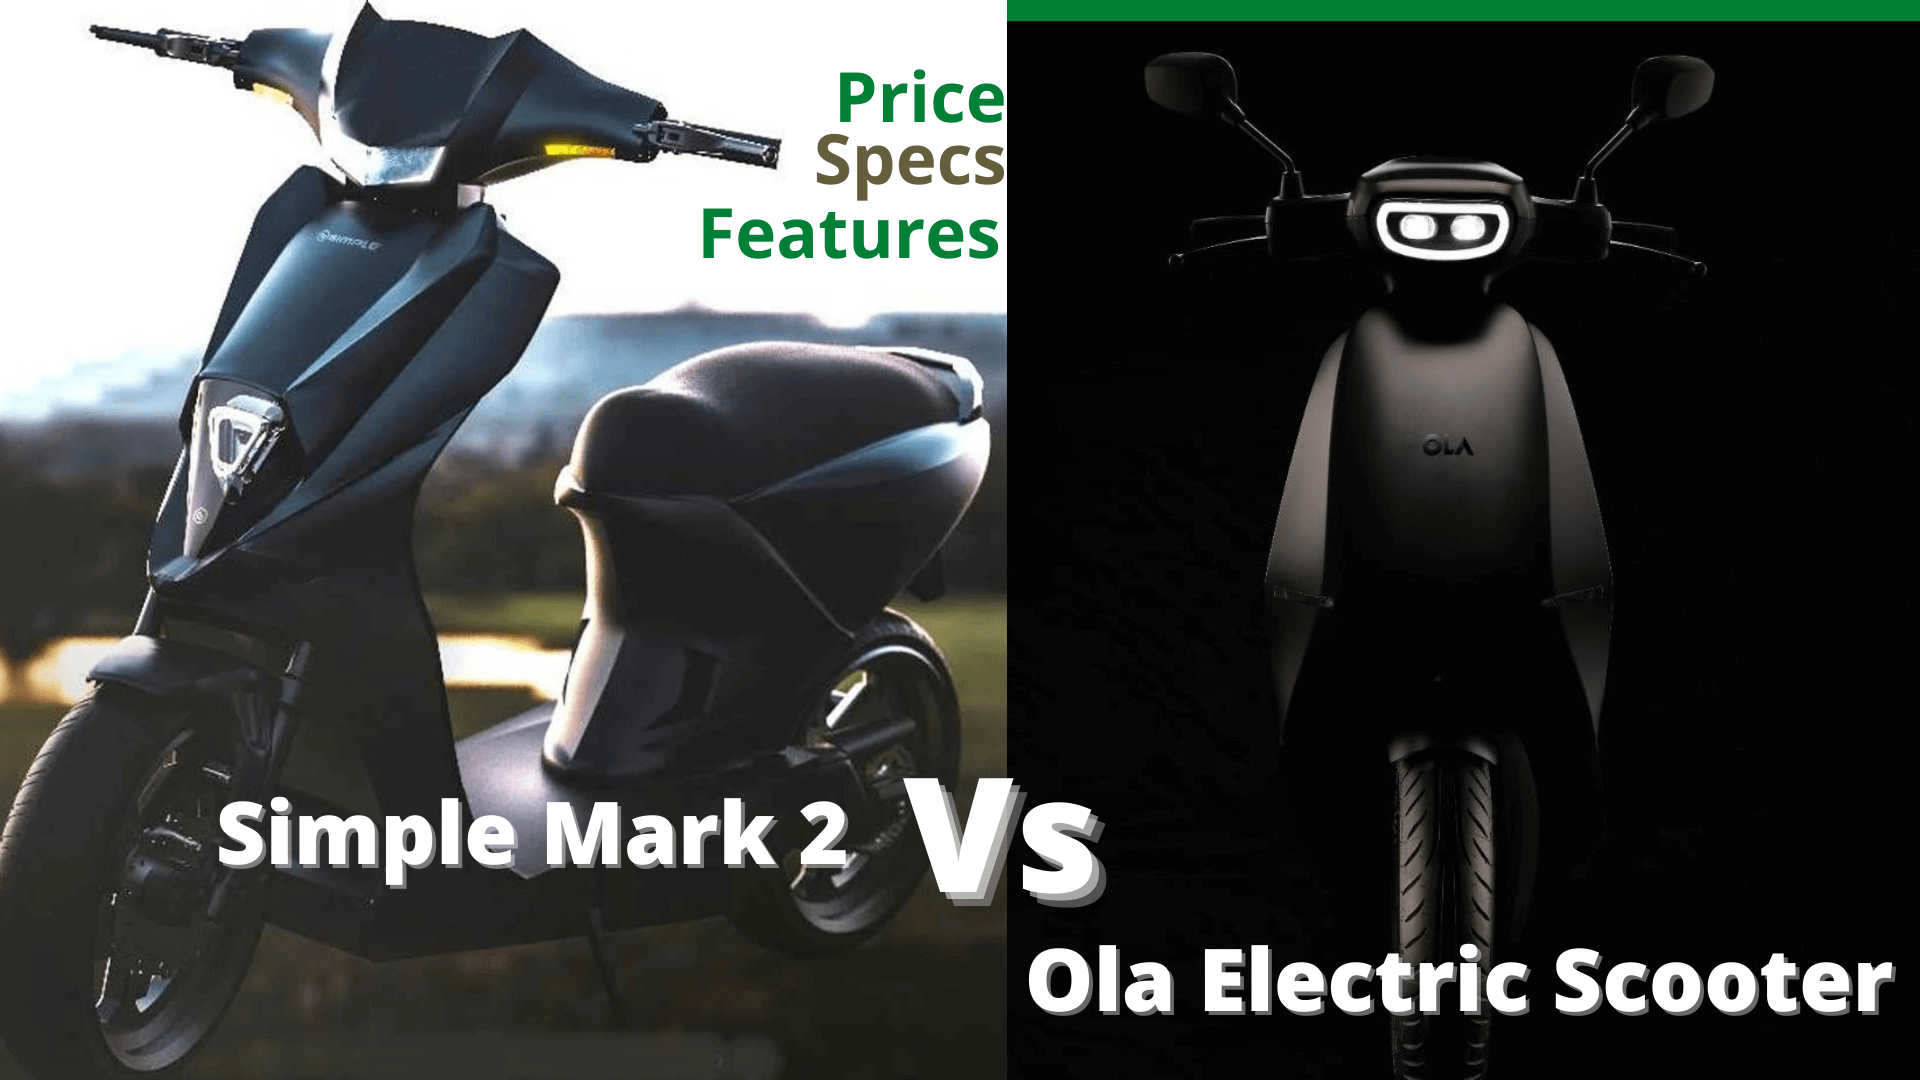 https://e-vehicleinfo.com/ola-electric-scooter-vs-simple-mark-2-price-specs-features/